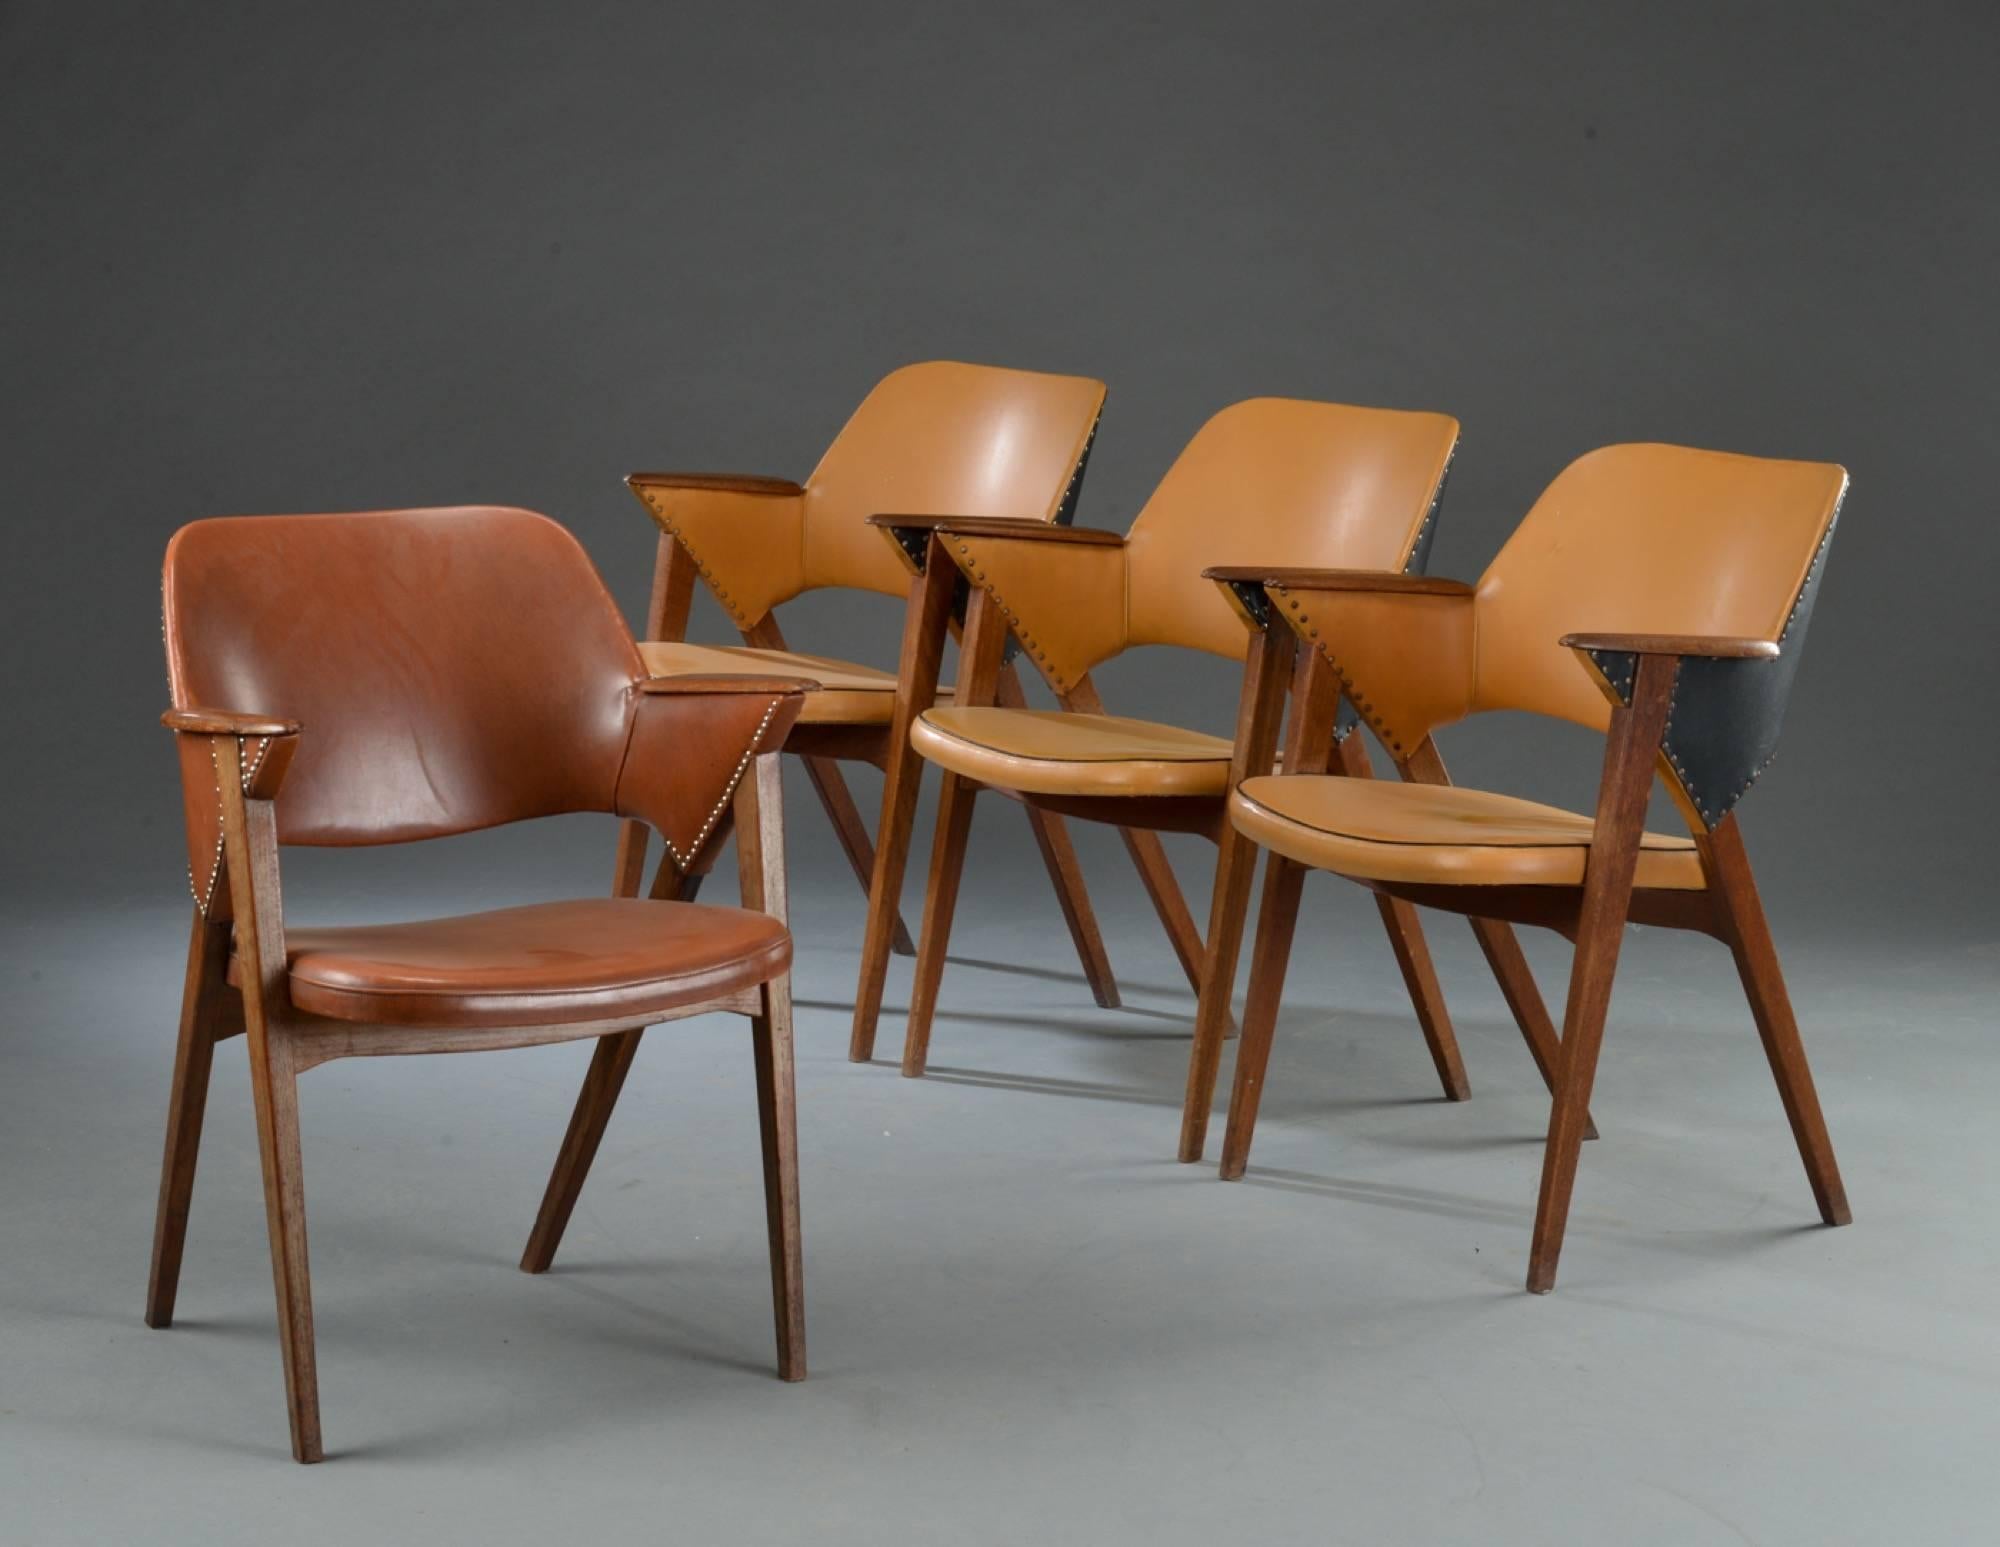 Set of four armchairs with teak seat and backrest. Seat and back upholstered with stitched leather. Danish furniture manufacturer, 1960s.